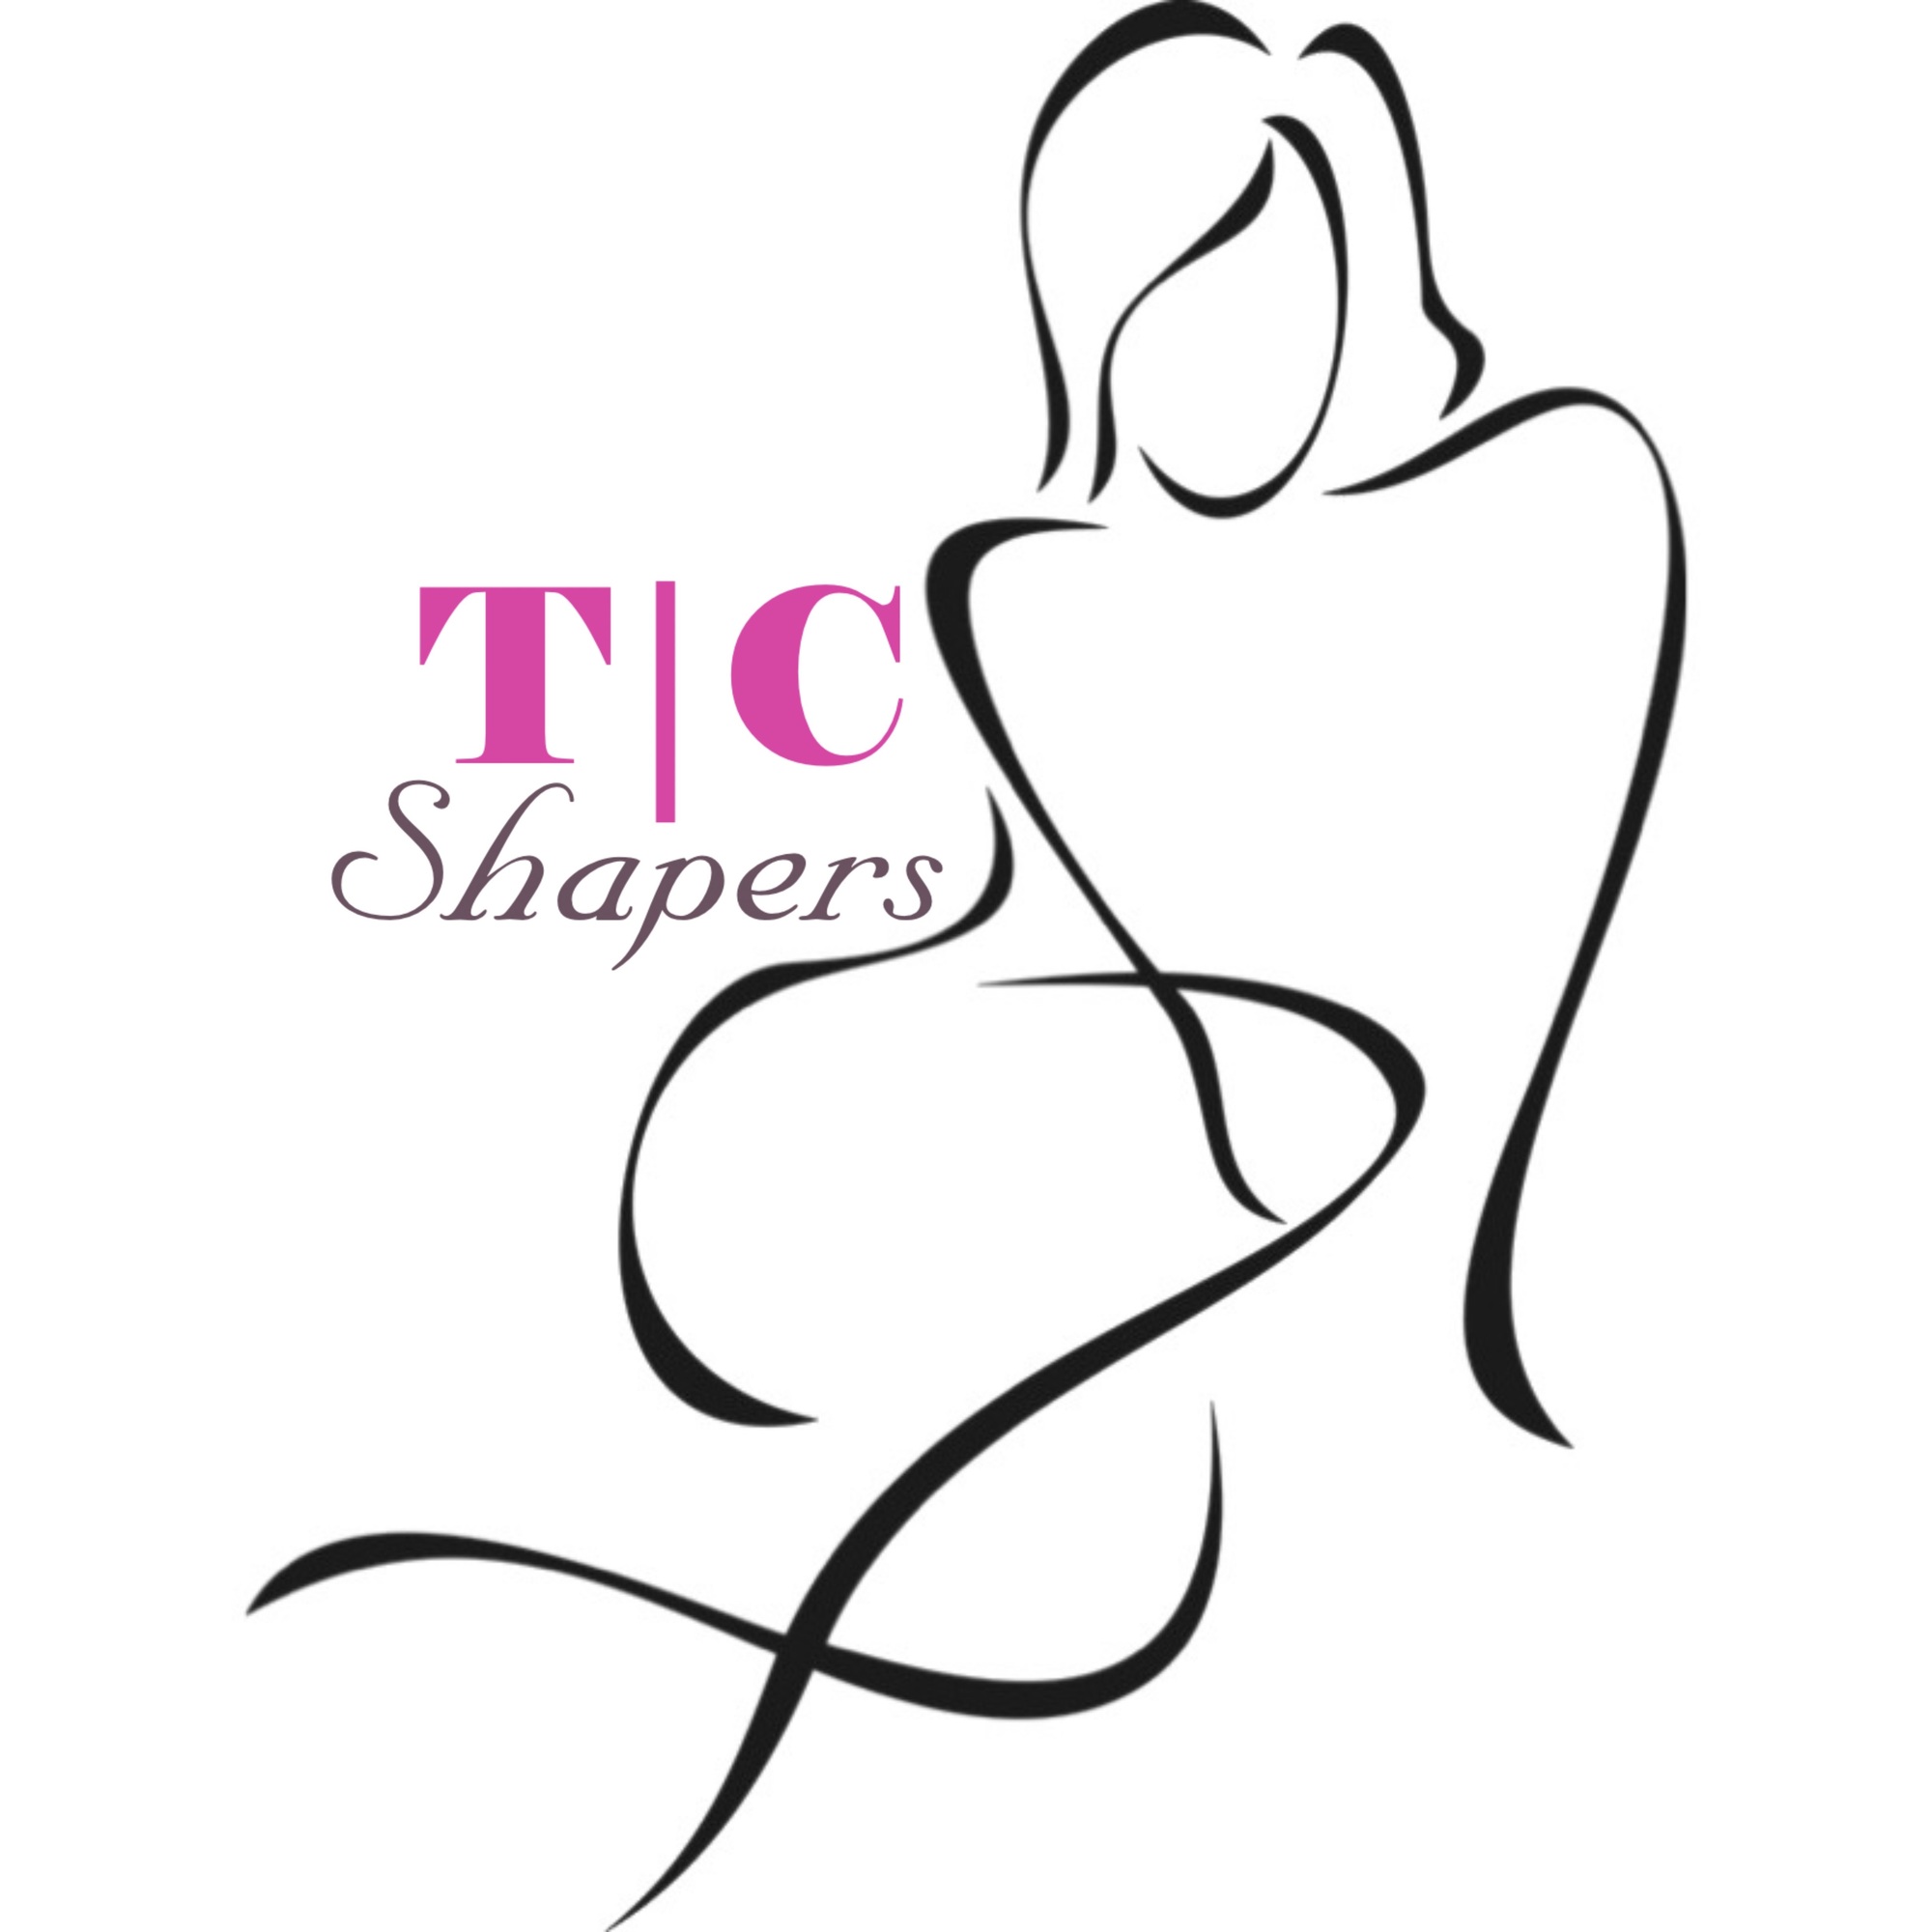 $6 Off On Orders Over $50 With TUMMYCON SHAPERS Coupon Code